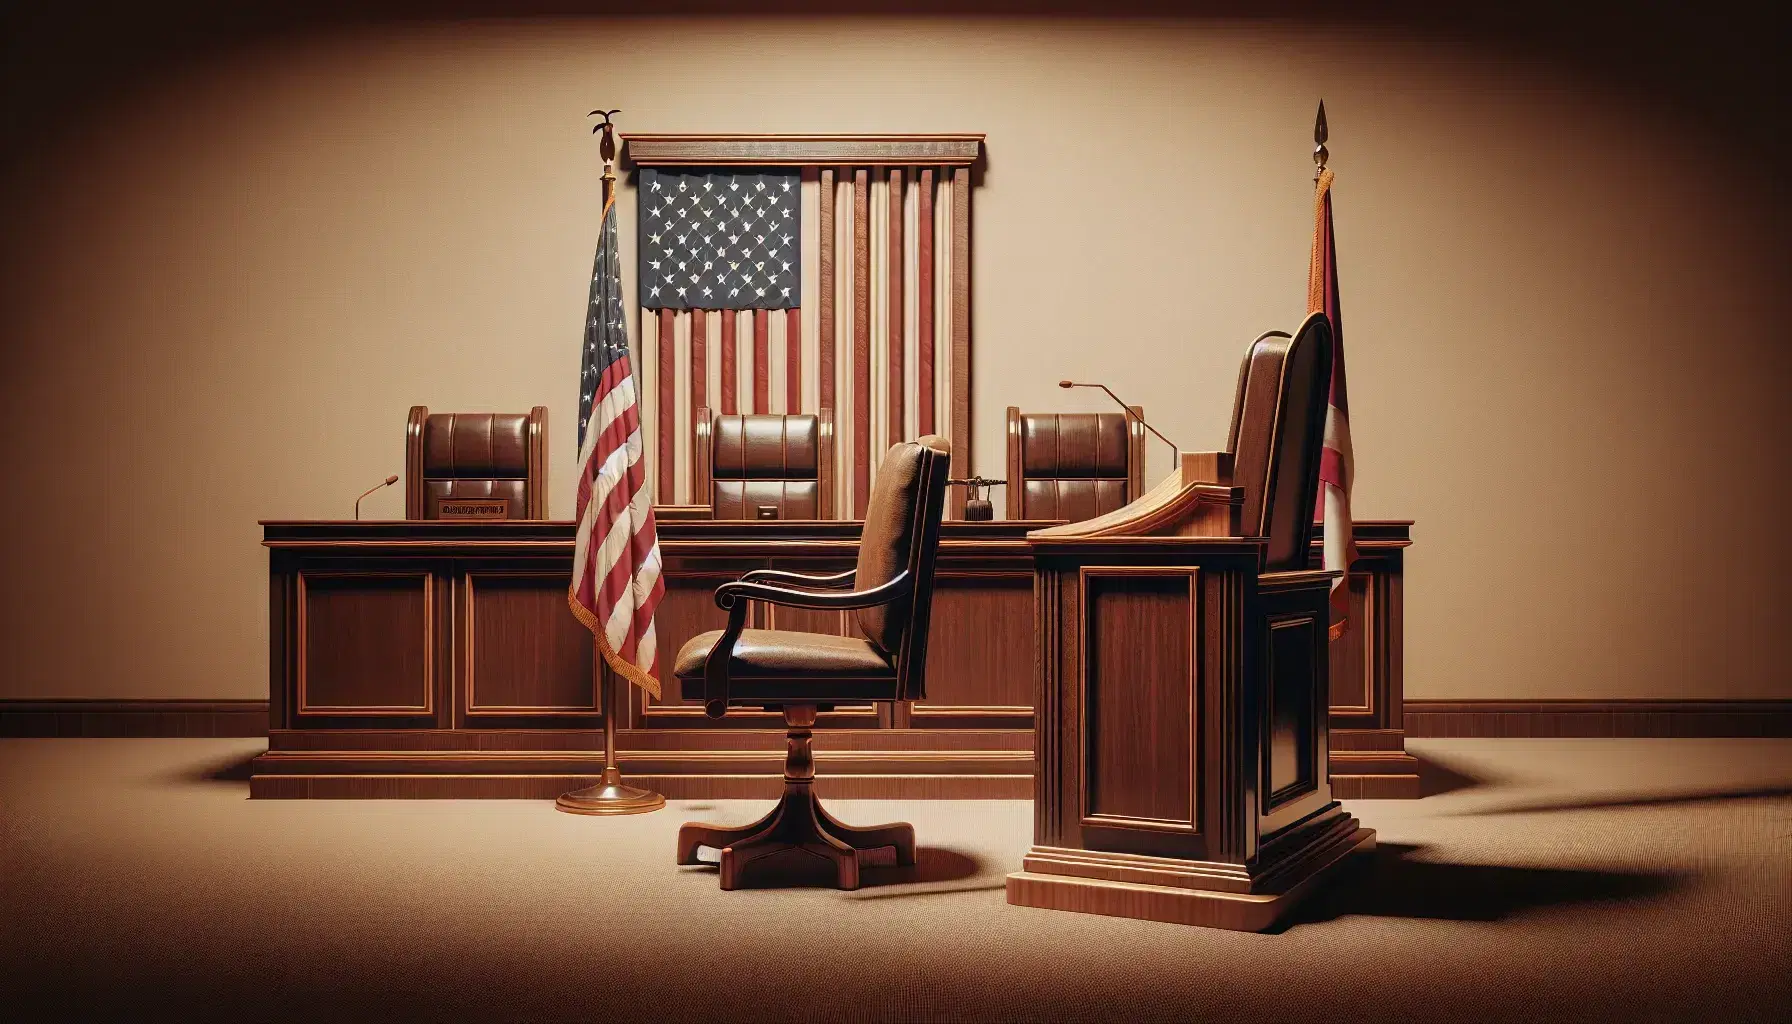 Empty courtroom with judge's bench, witness stand, jury box, and American flag, all in dark wood and under soft lighting, conveying solemnity.